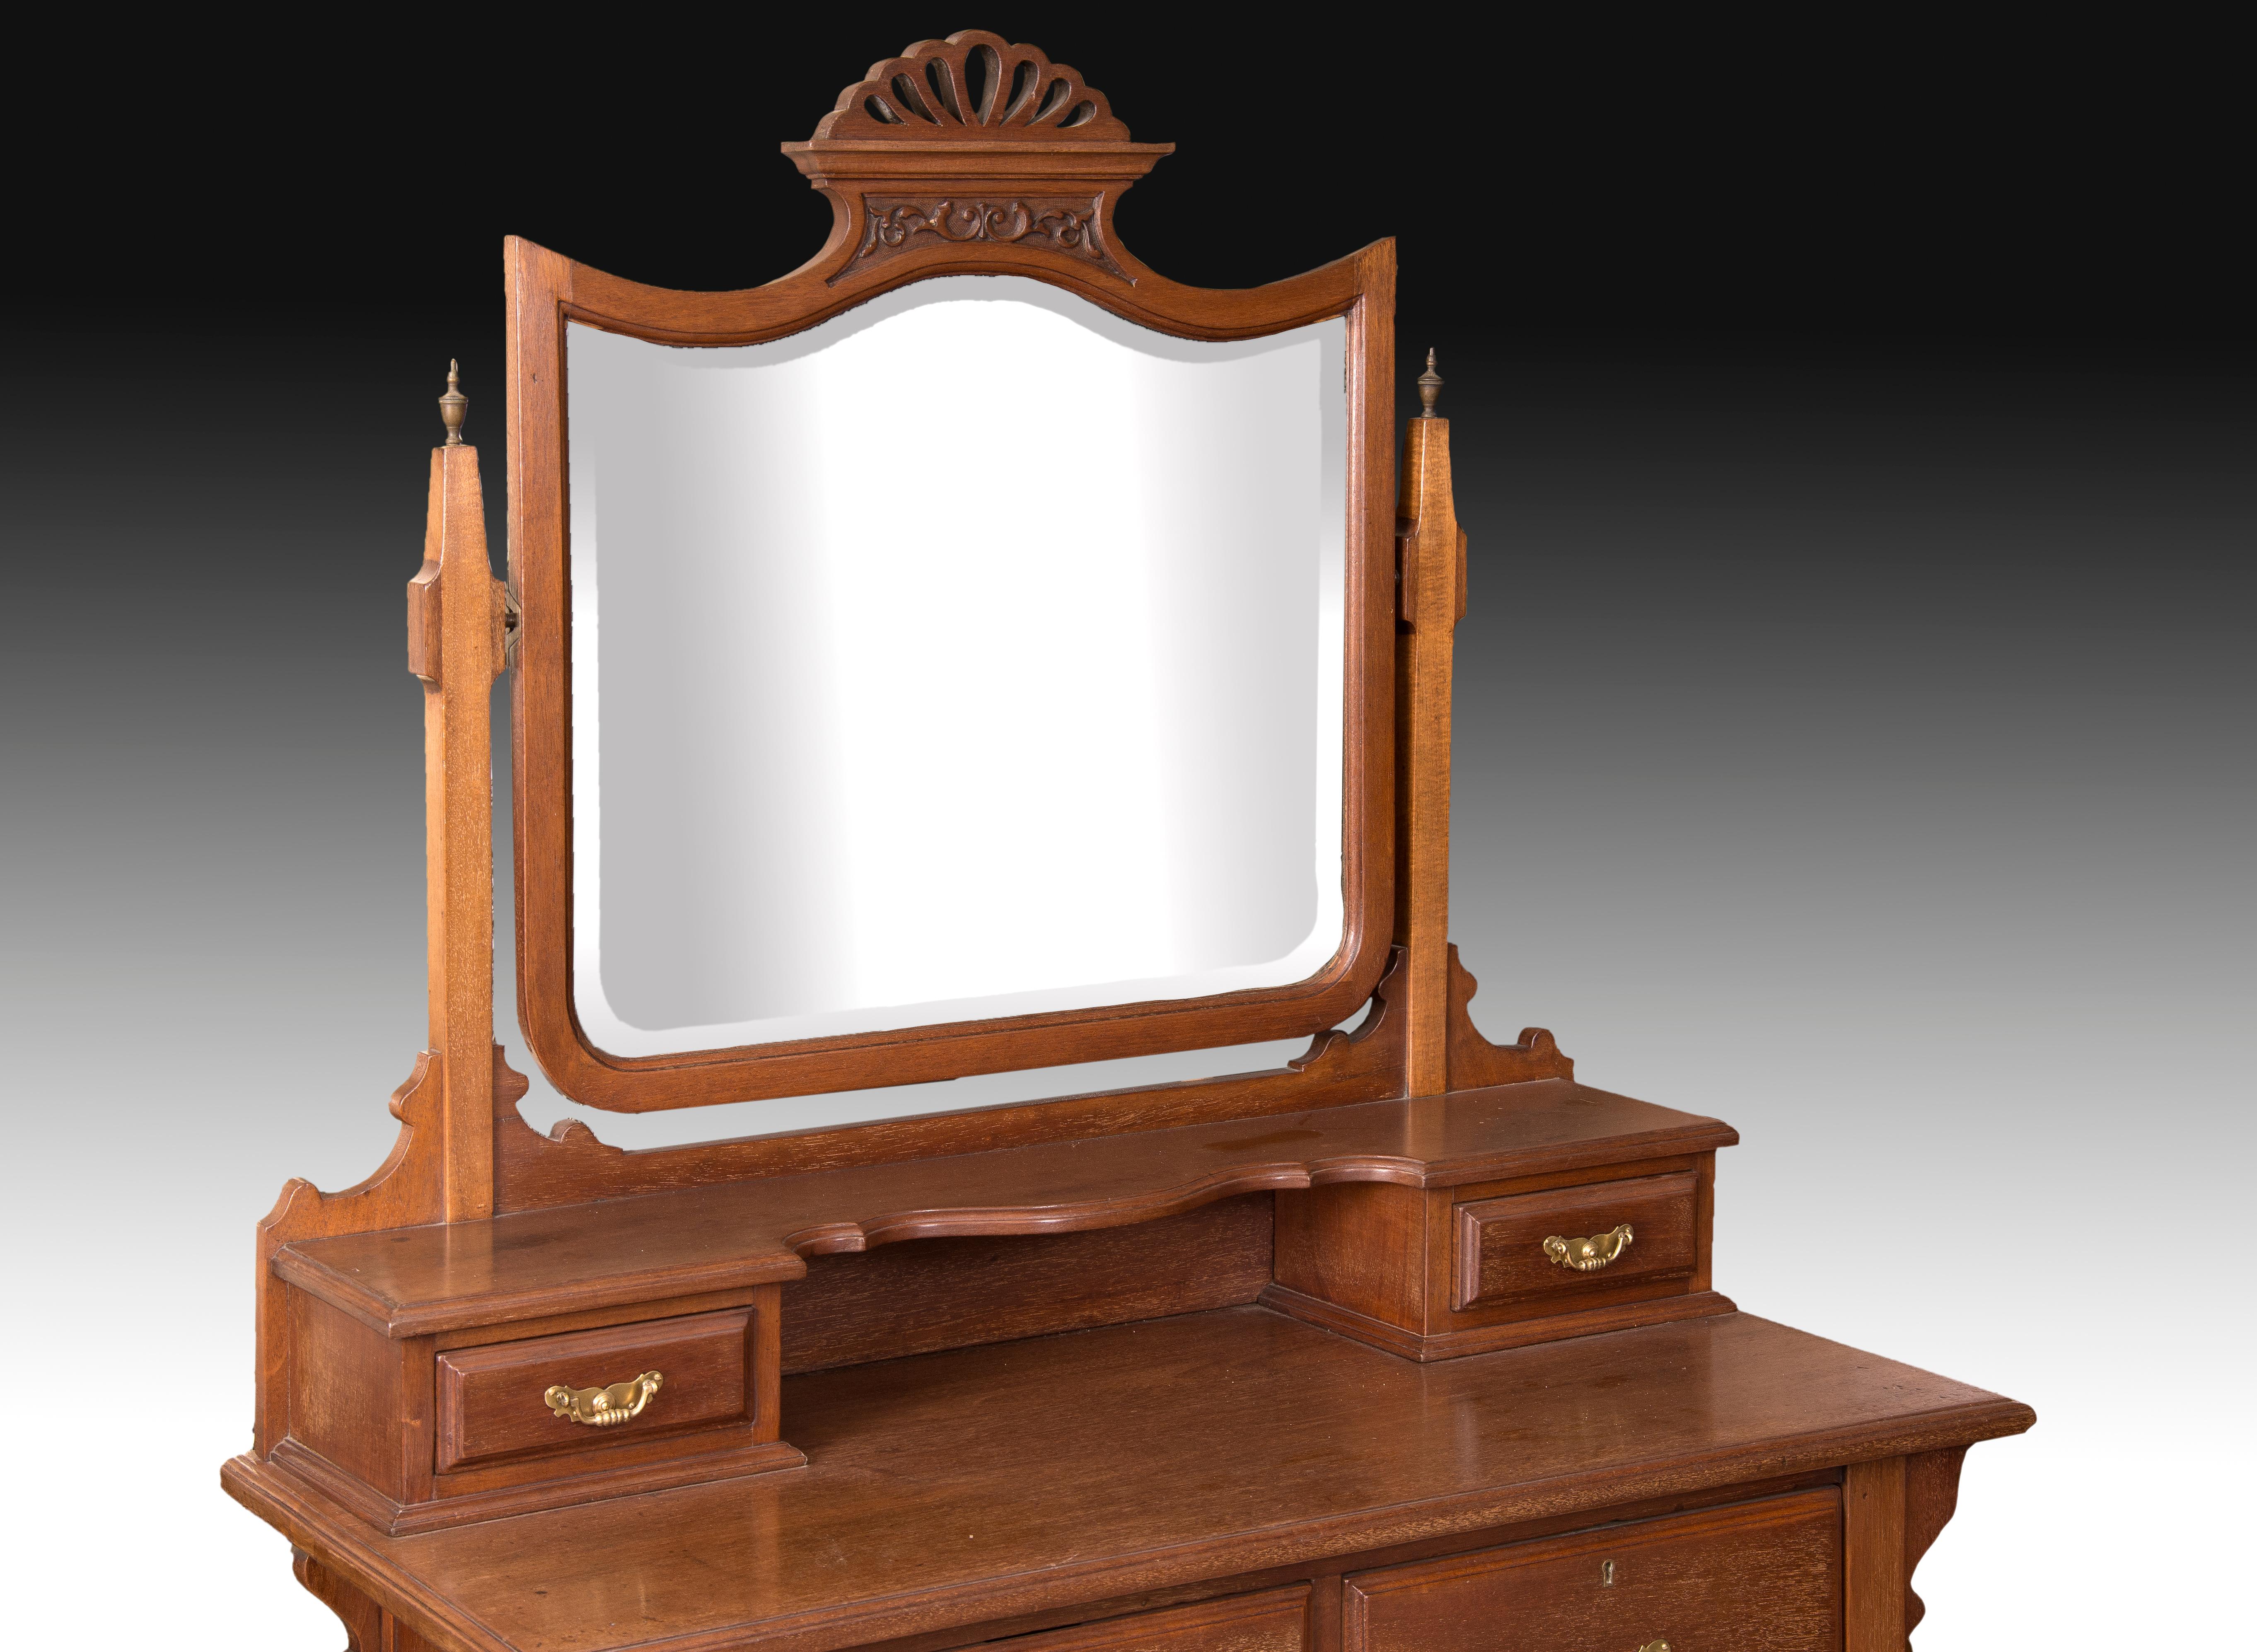 Dresser in carved mahogany wood with metal sheaves on the legs, three drawers to the front and a top board with two drawers flanking a space, and a swing mirror topped with an openwork crest. The few carvings that the furniture presents, its lines